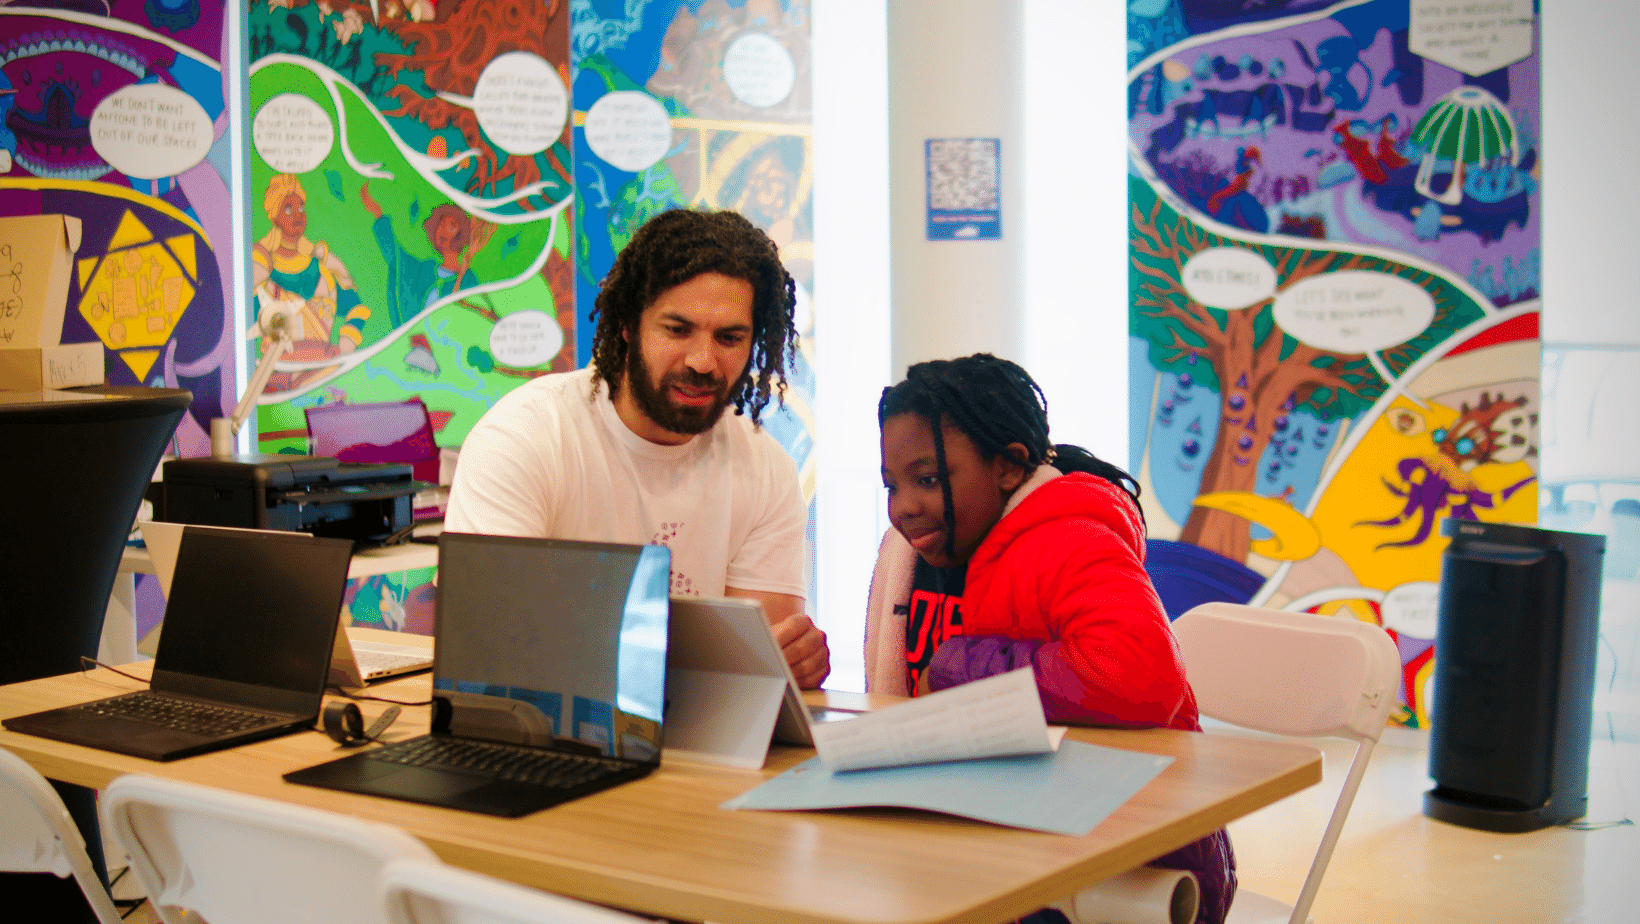 Facilitator Nigel works with a youth over a laptop at the grand opening launch event